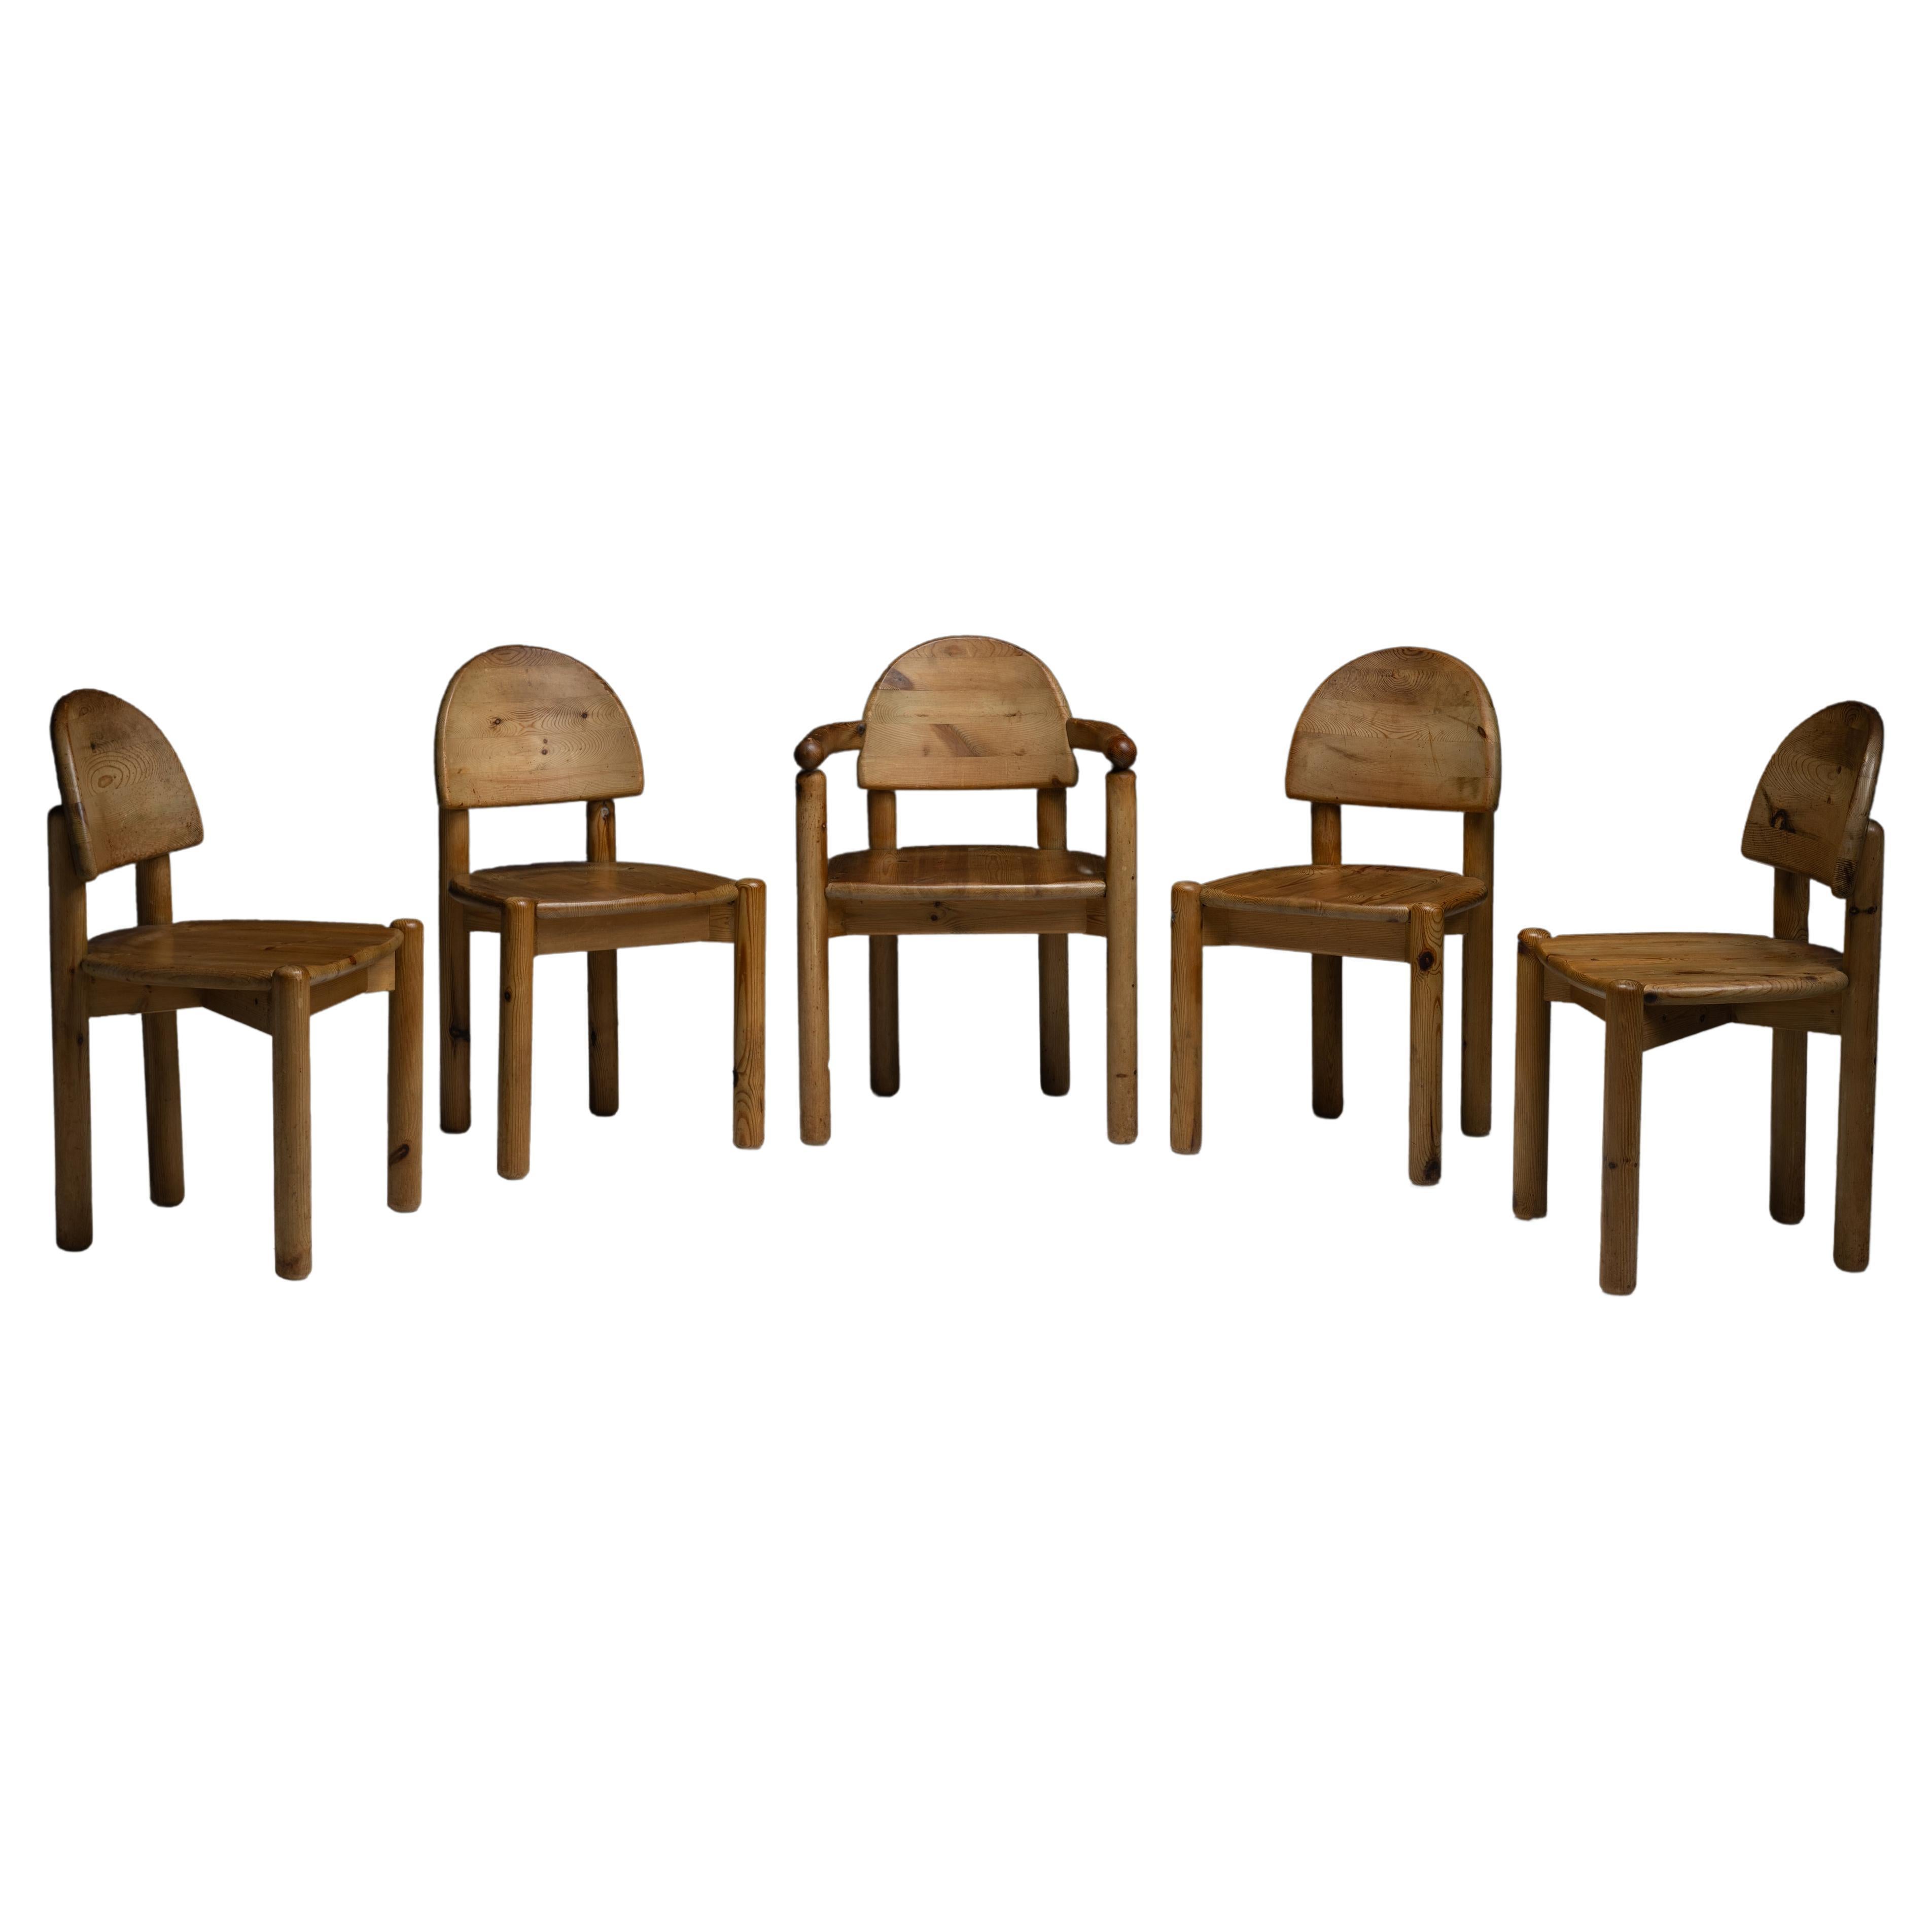 Rene Daumiller Dining Chairs, Denmark circa 1970 For Sale